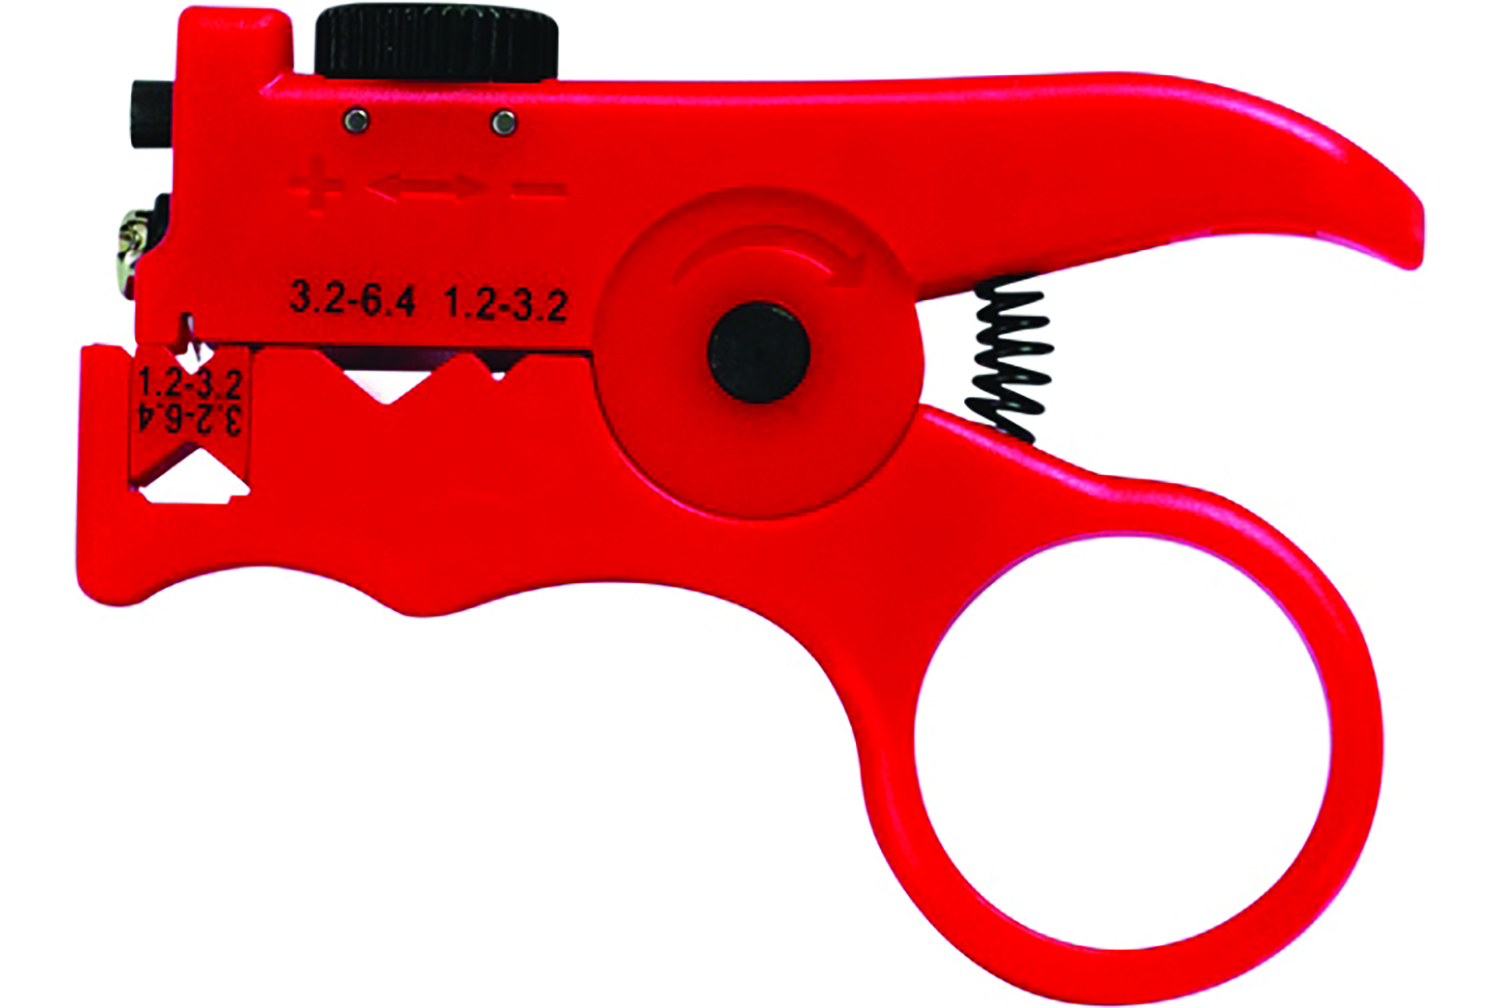 Red and black fiber cable stripper. Image by Platinum Tools.